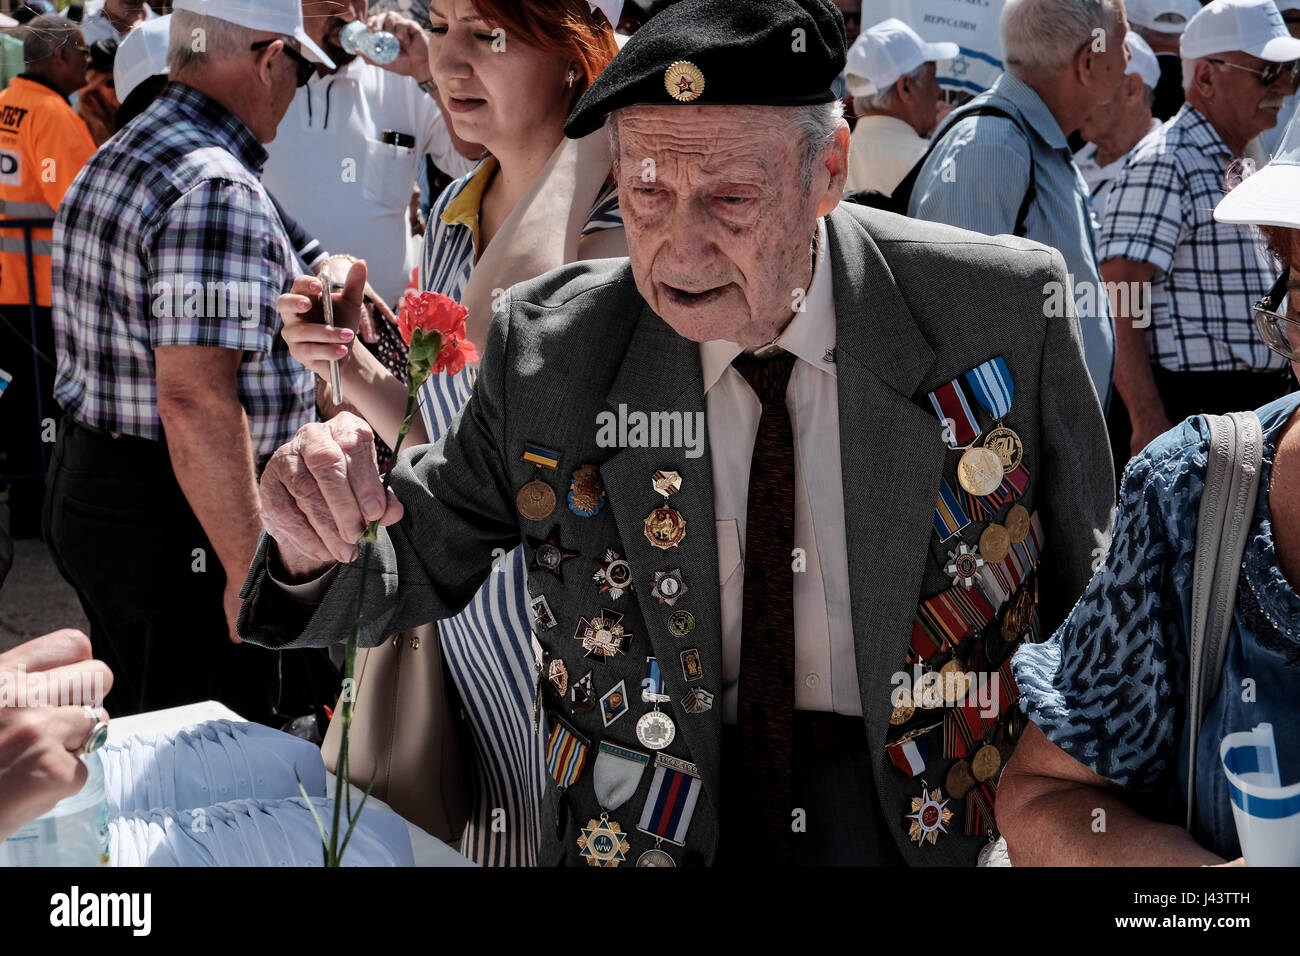 Jerusalem, Israel. 9th May, 2017. WWII veterans, widows, descendants and families from around the country assemble in Jerusalem, many in their WWII uniforms with medals and decorations, to commemorate their loved ones and celebrate Allied victory over Nazi Germany. Credit: Nir Alon/Alamy Live News Stock Photo